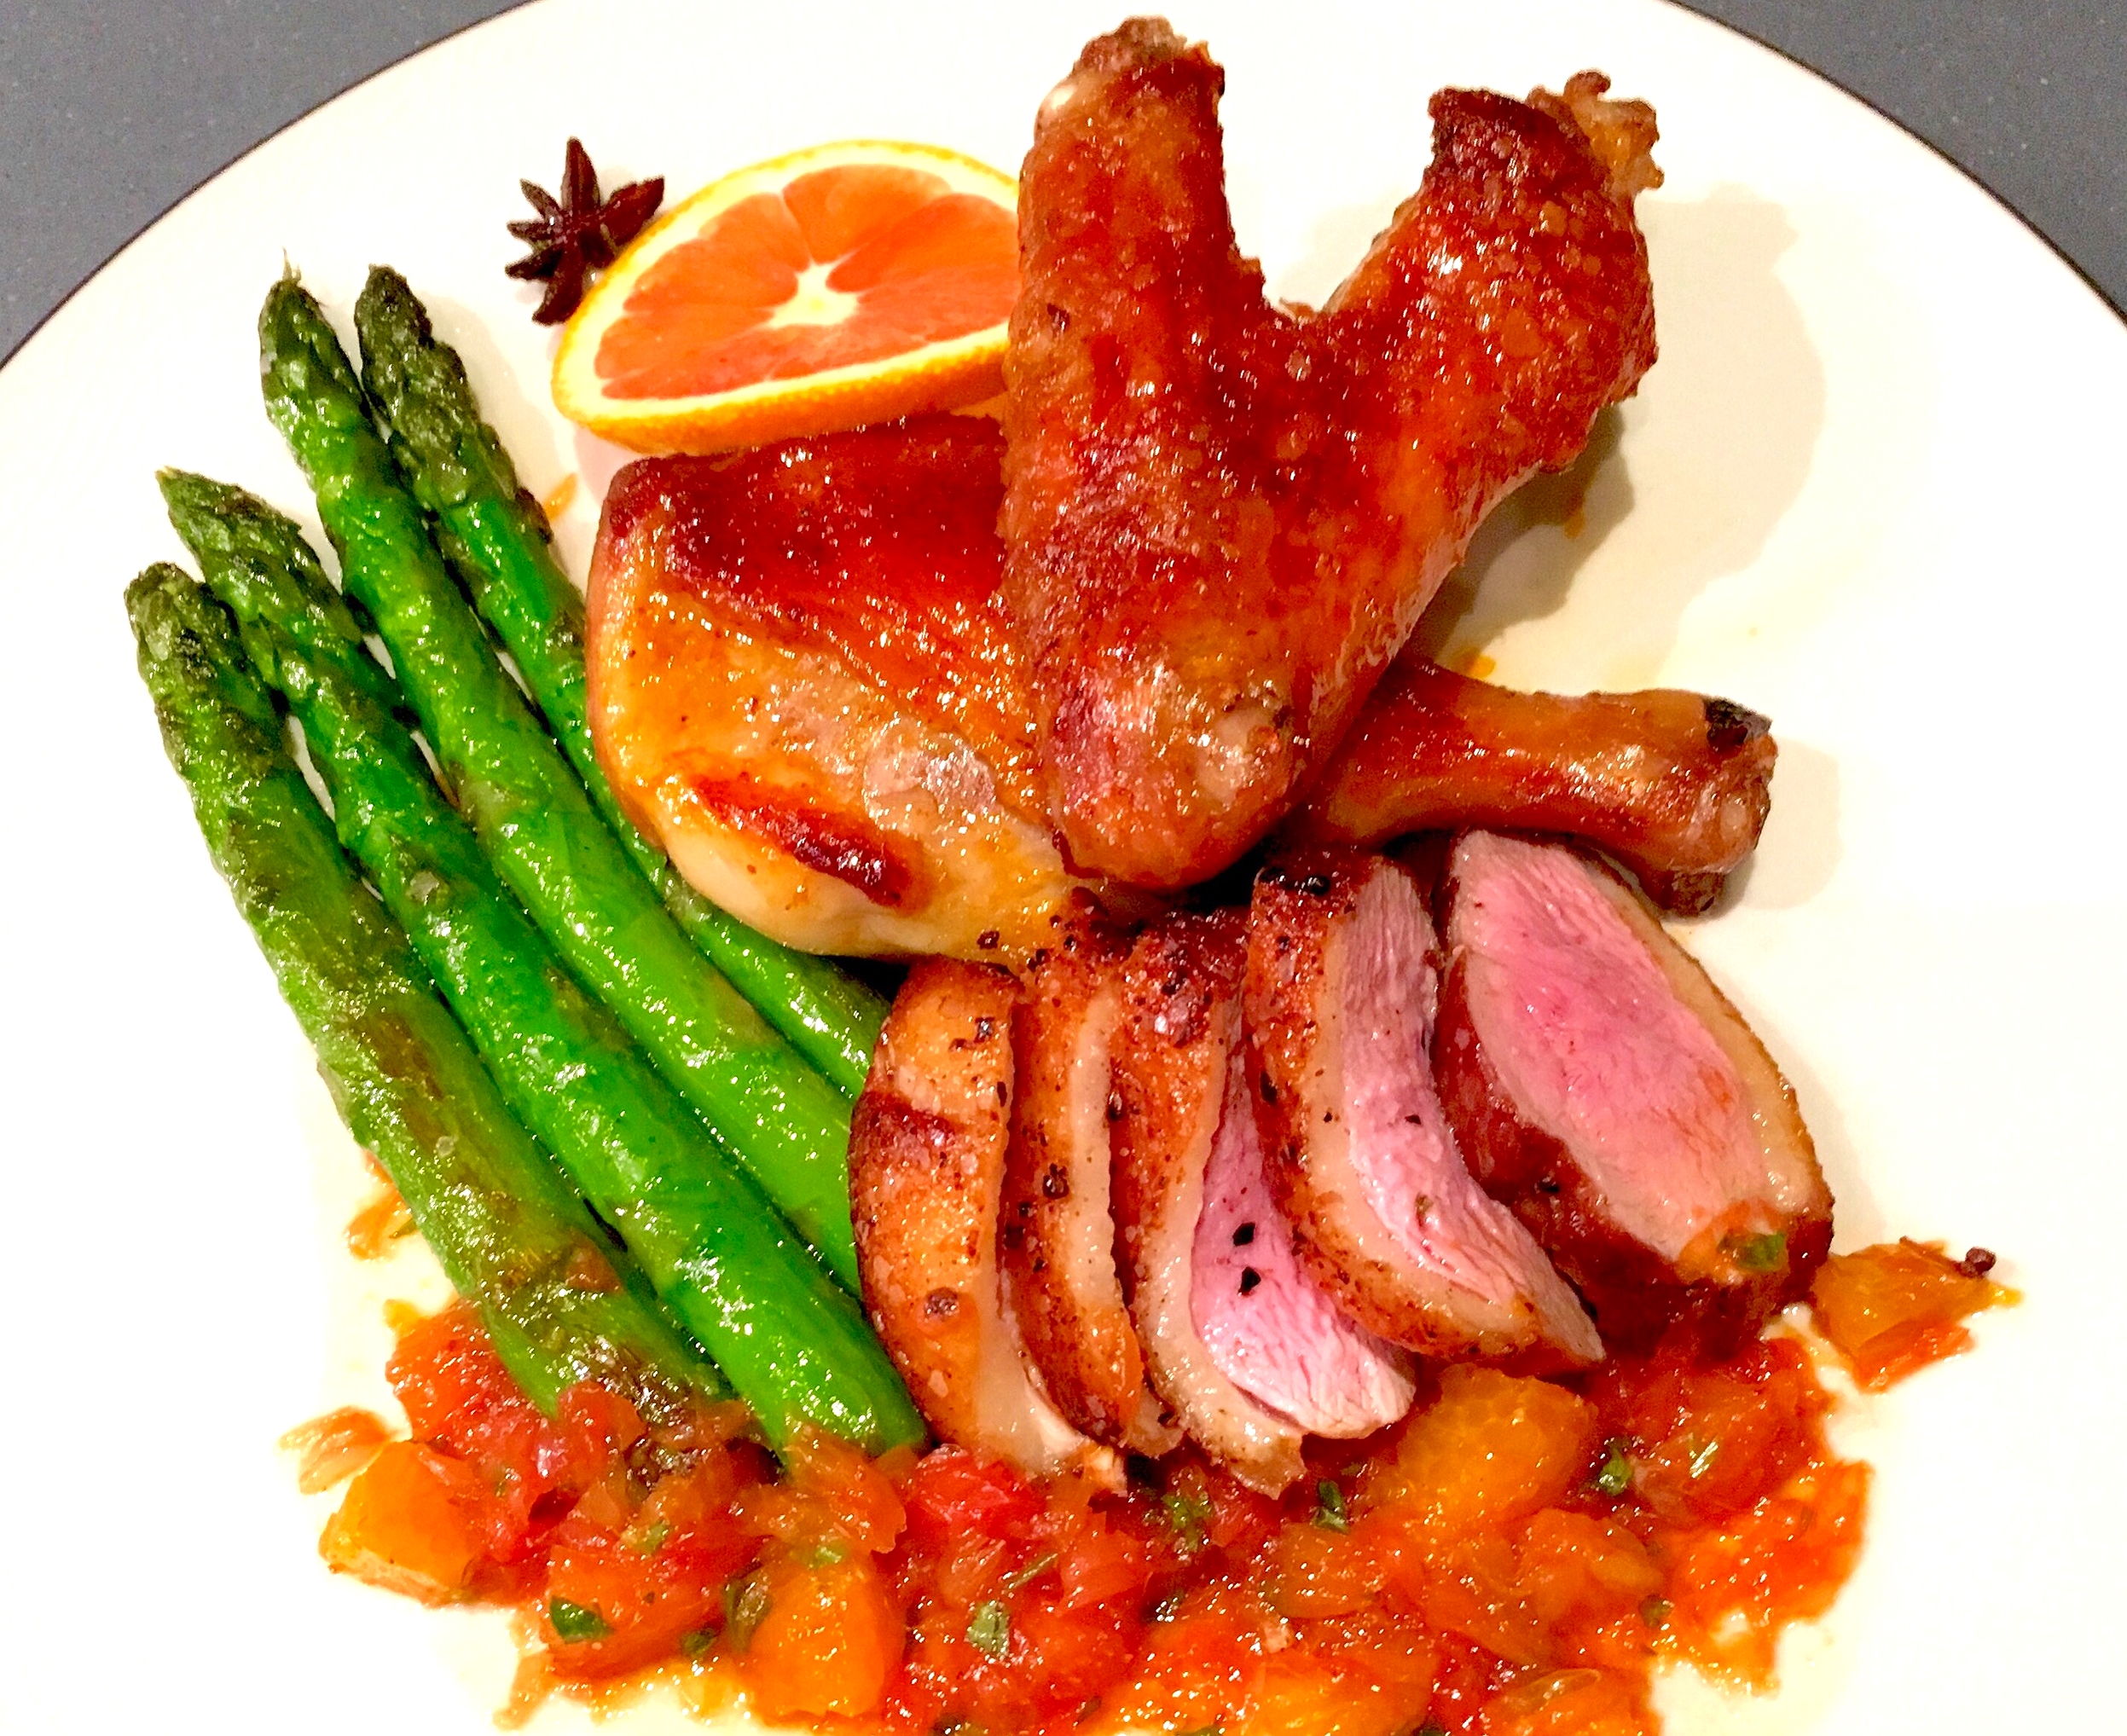 Roasted duck breast and leg with spiced citrus sauce and seared asparagus